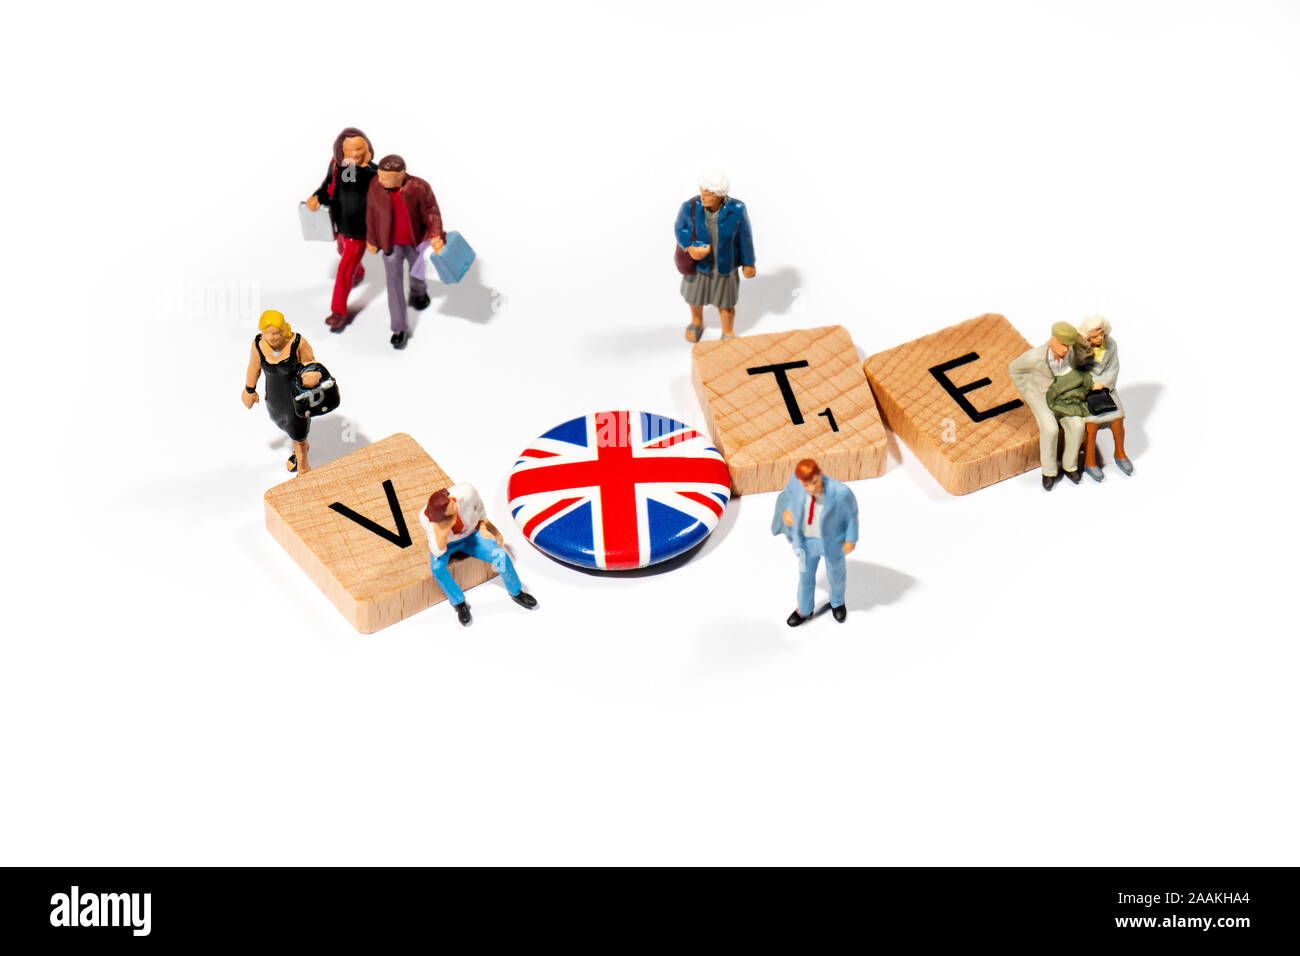 Conceptual: Scrabble letters spell out VOTE, accompanied by  model people figurines. Stock Photo